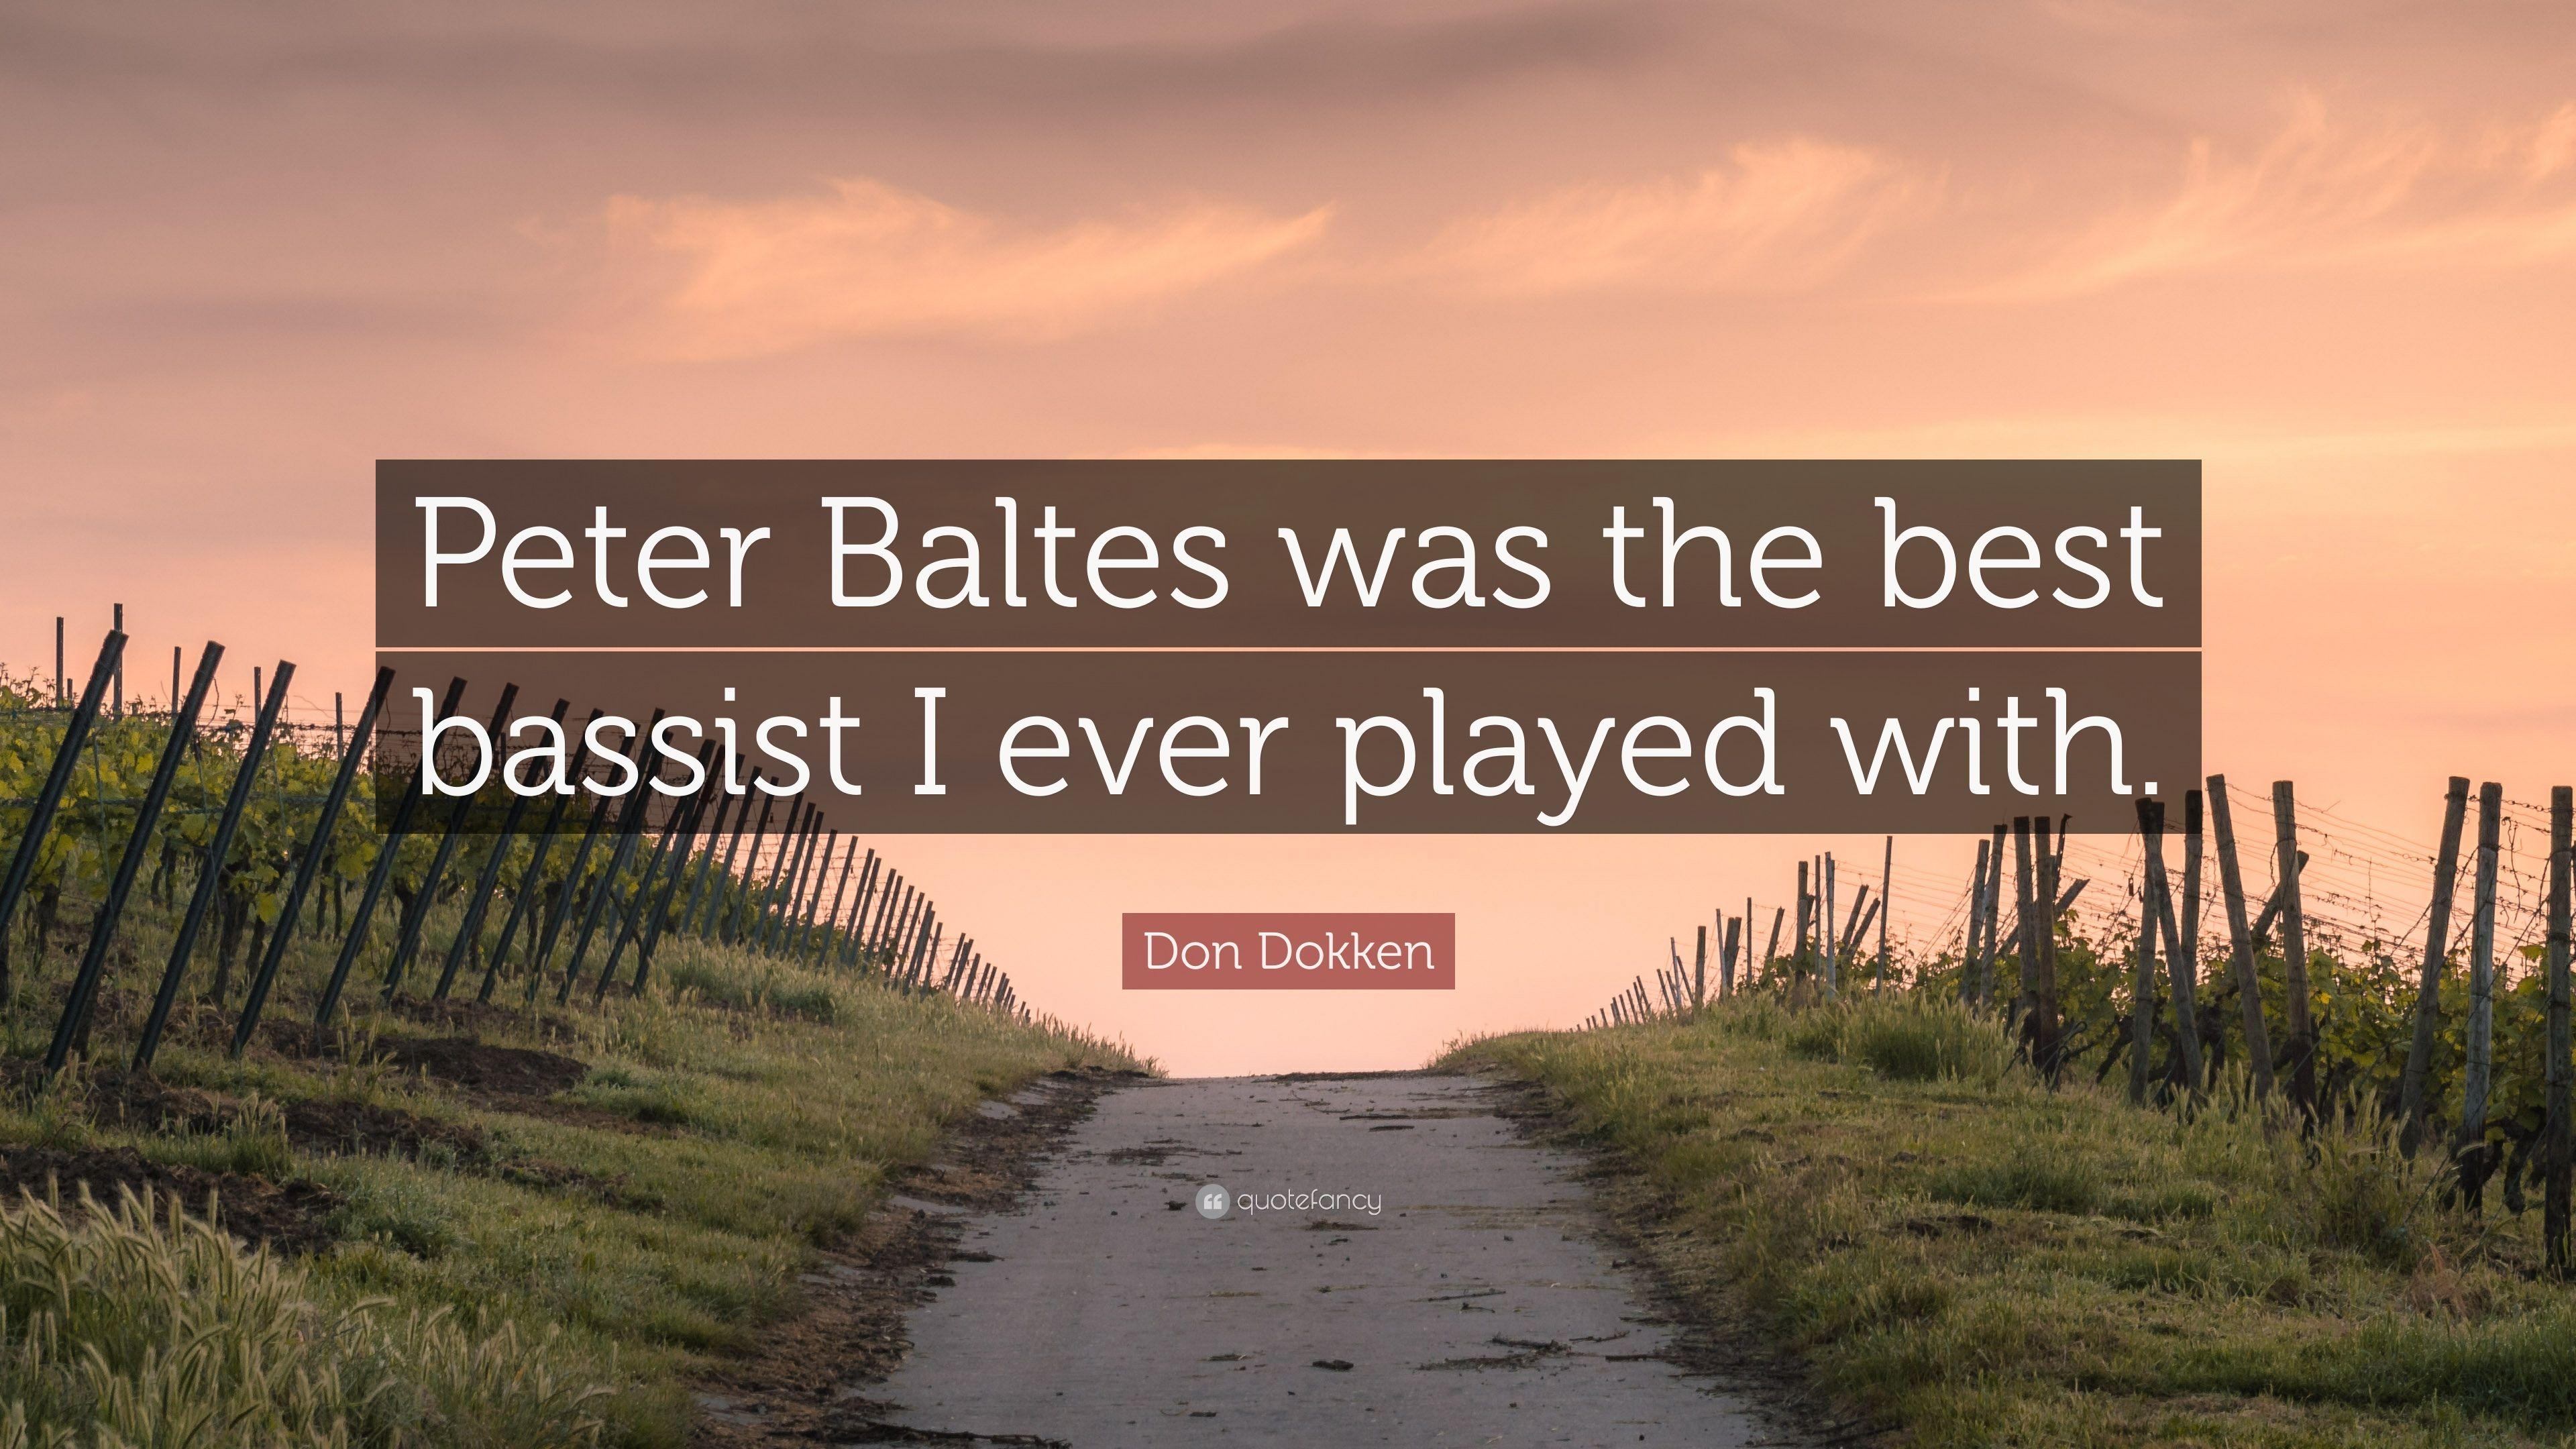 Don Dokken Quote: “Peter Baltes was the best bassist I ever played